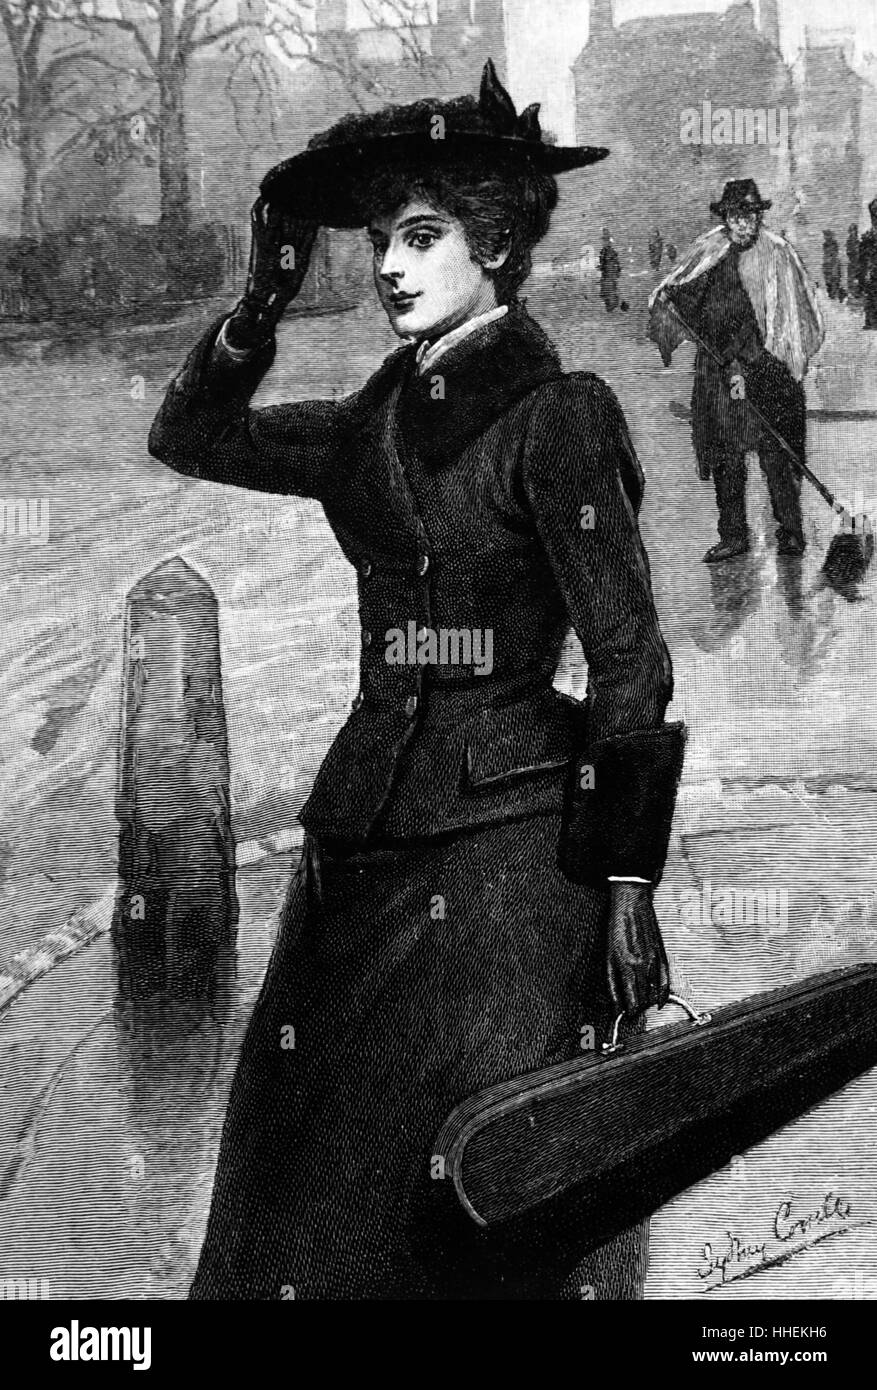 Illustration titled 'The Breadwinner' depicting a young widow on her way to a concert to earn money to support her family. Dated 19th Century Stock Photo